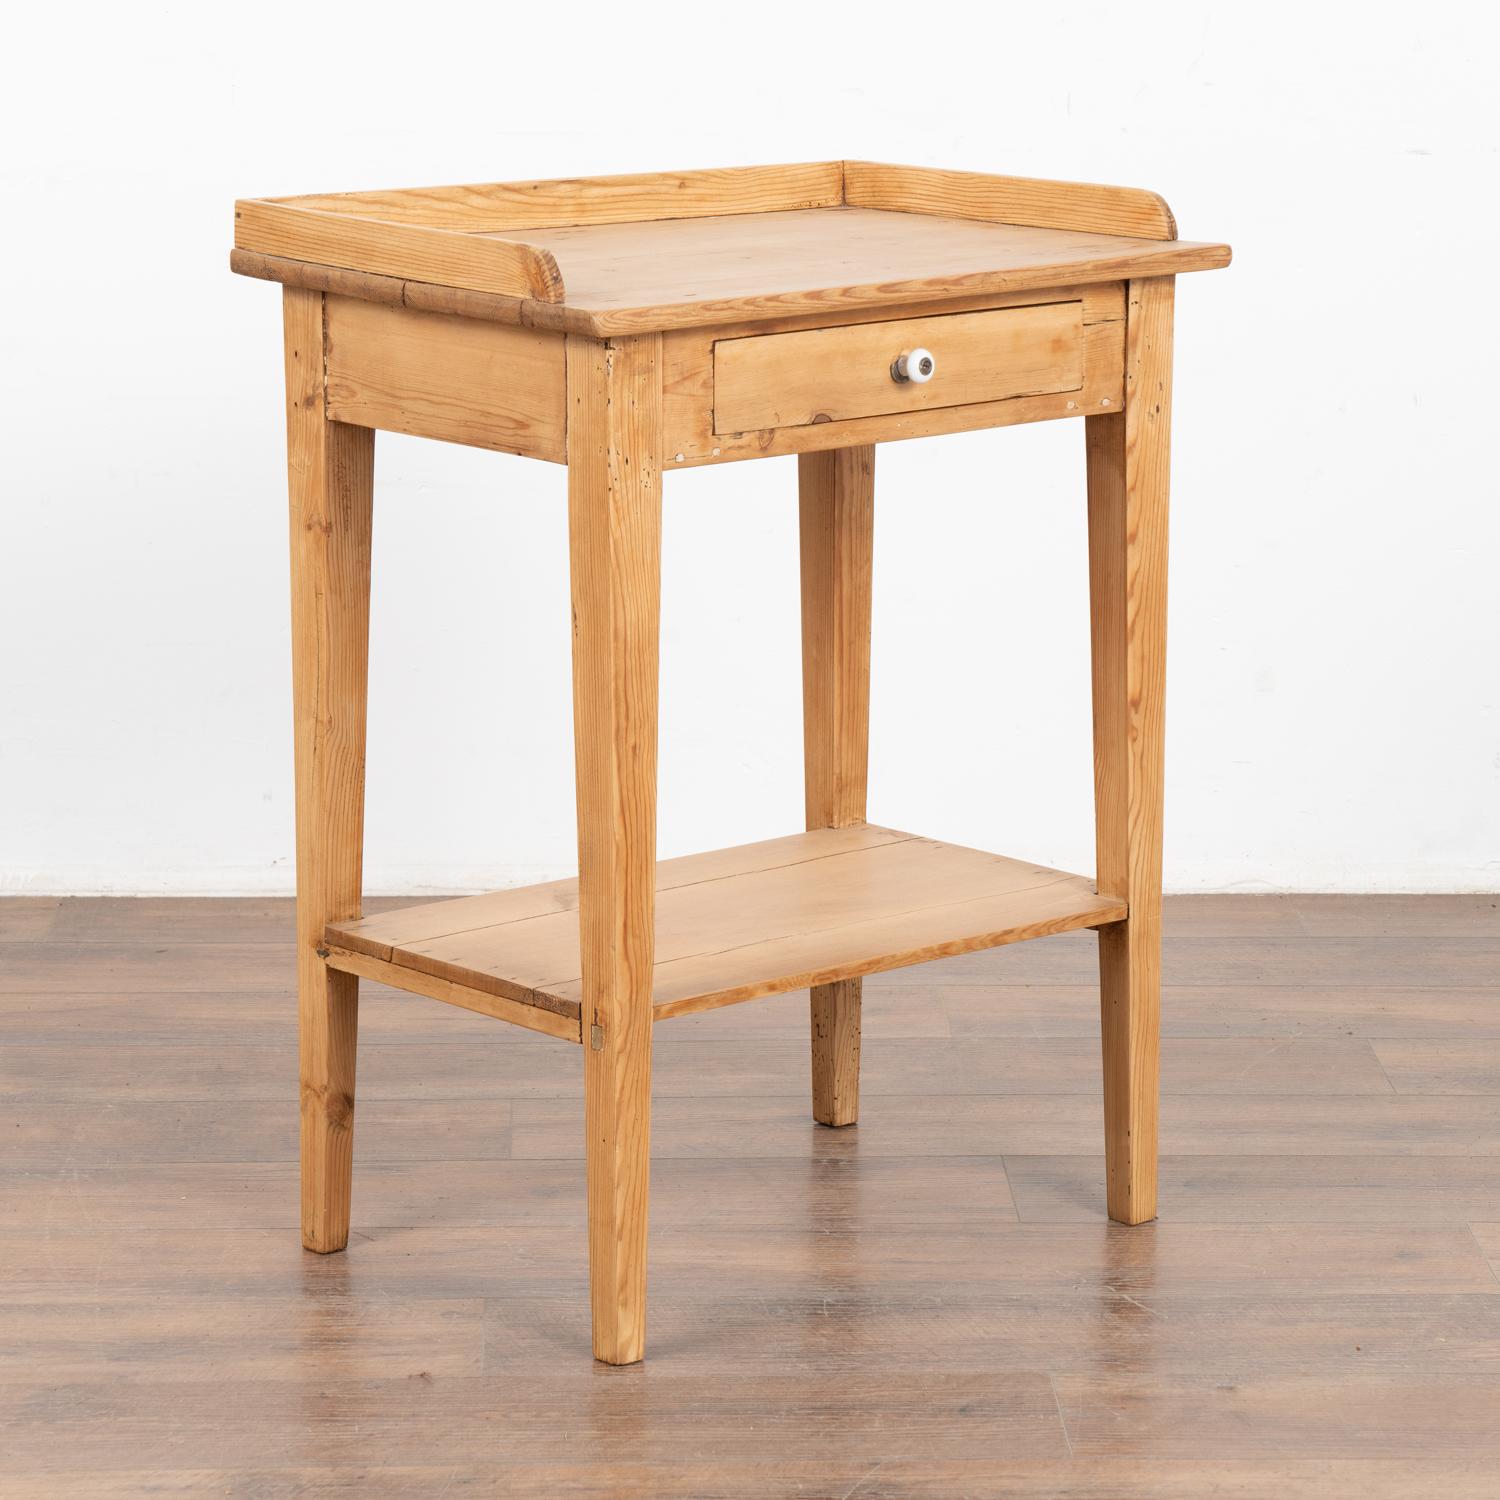 This delightful country pine table with single drawer and raised rim/trim will make a casual side table or nightstand. 
This table has been restored, the drawer function with pull and it is ready to be used and enjoyed.
All scratches, cracks, dings,